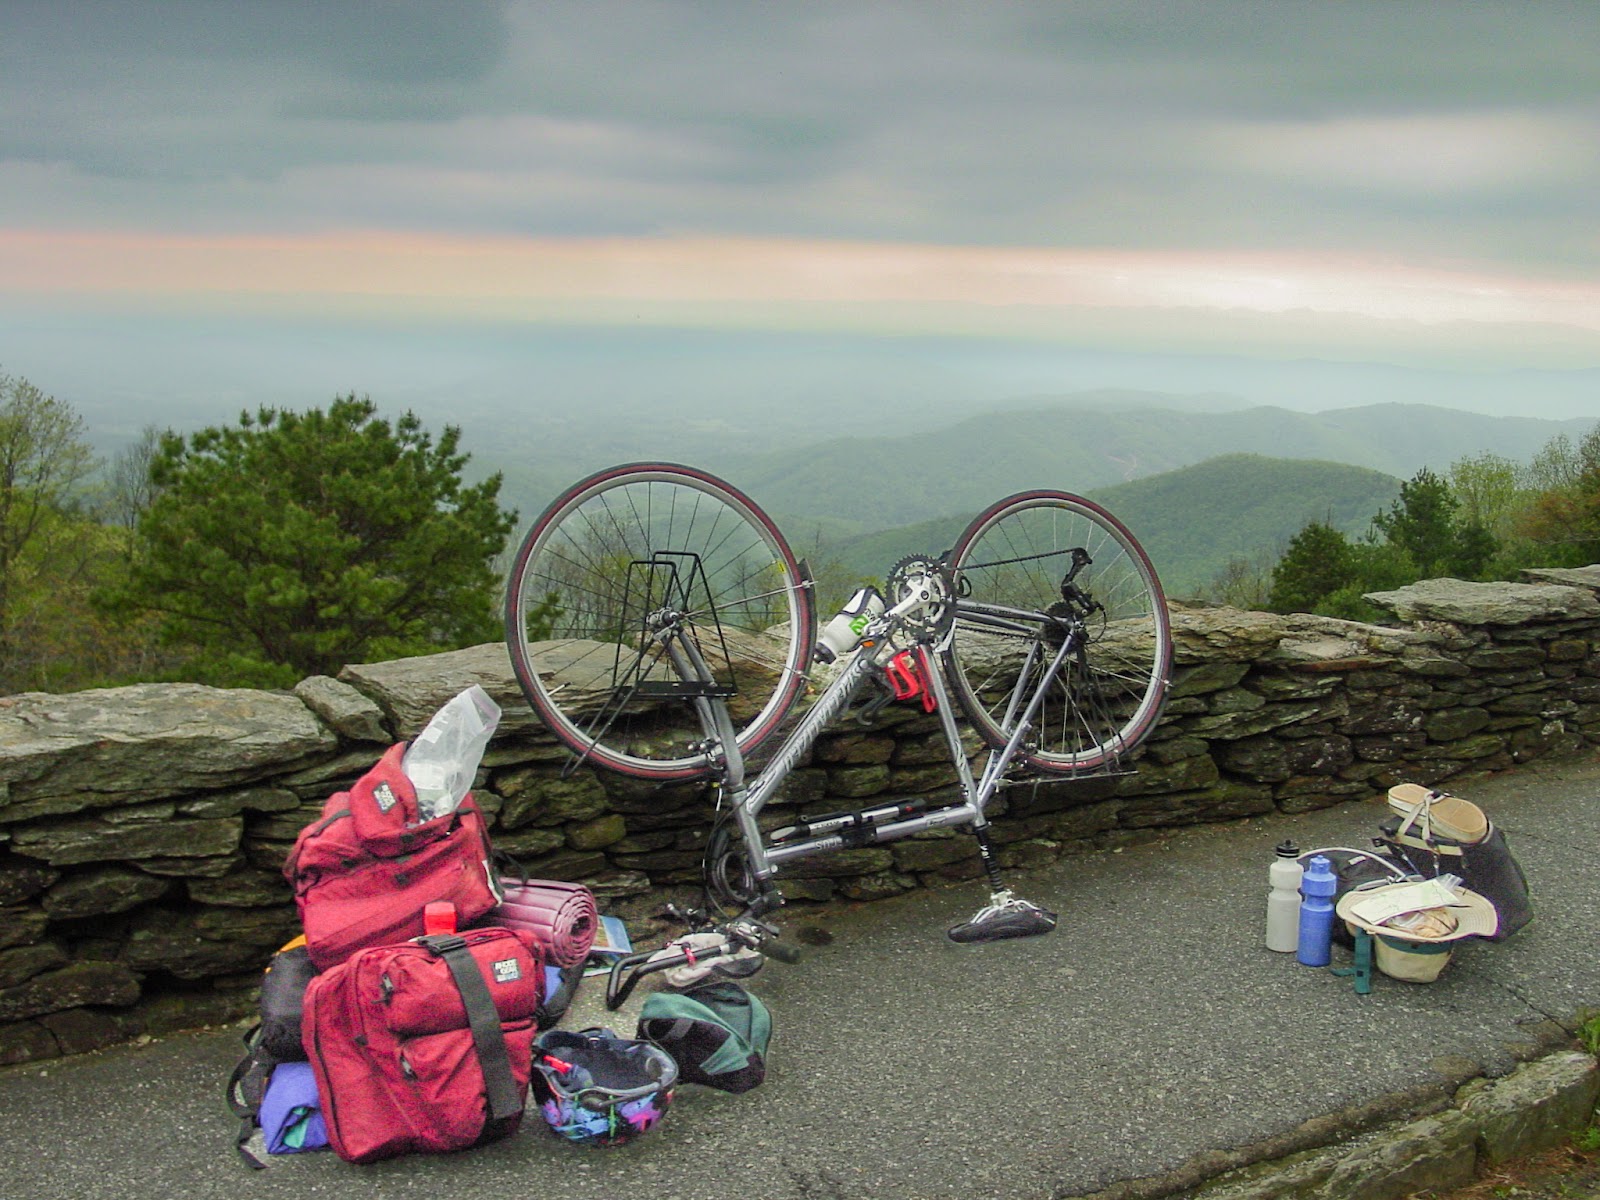 A bike turned upside down with gear spread around it leaning on a rock wall overlook. The sky has a yellow streak and is cloudy and dark. 